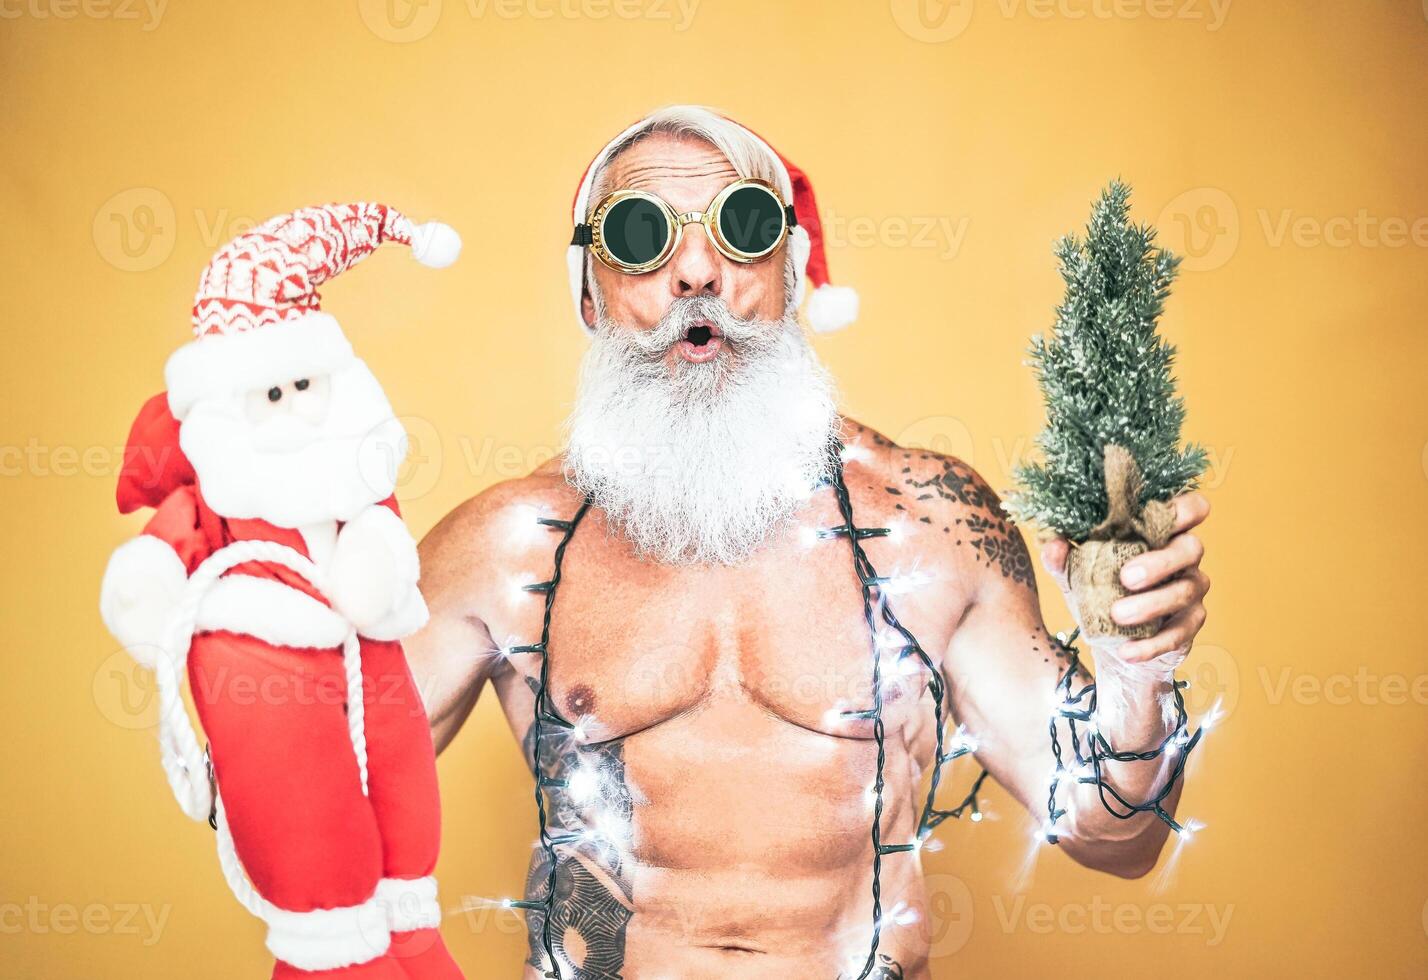 Happy fit santa claus equiped with white christmas lights - Trendy beard hipster senior holding a mini santa claus puppet and xmas tree - Celebration and holidays concept photo